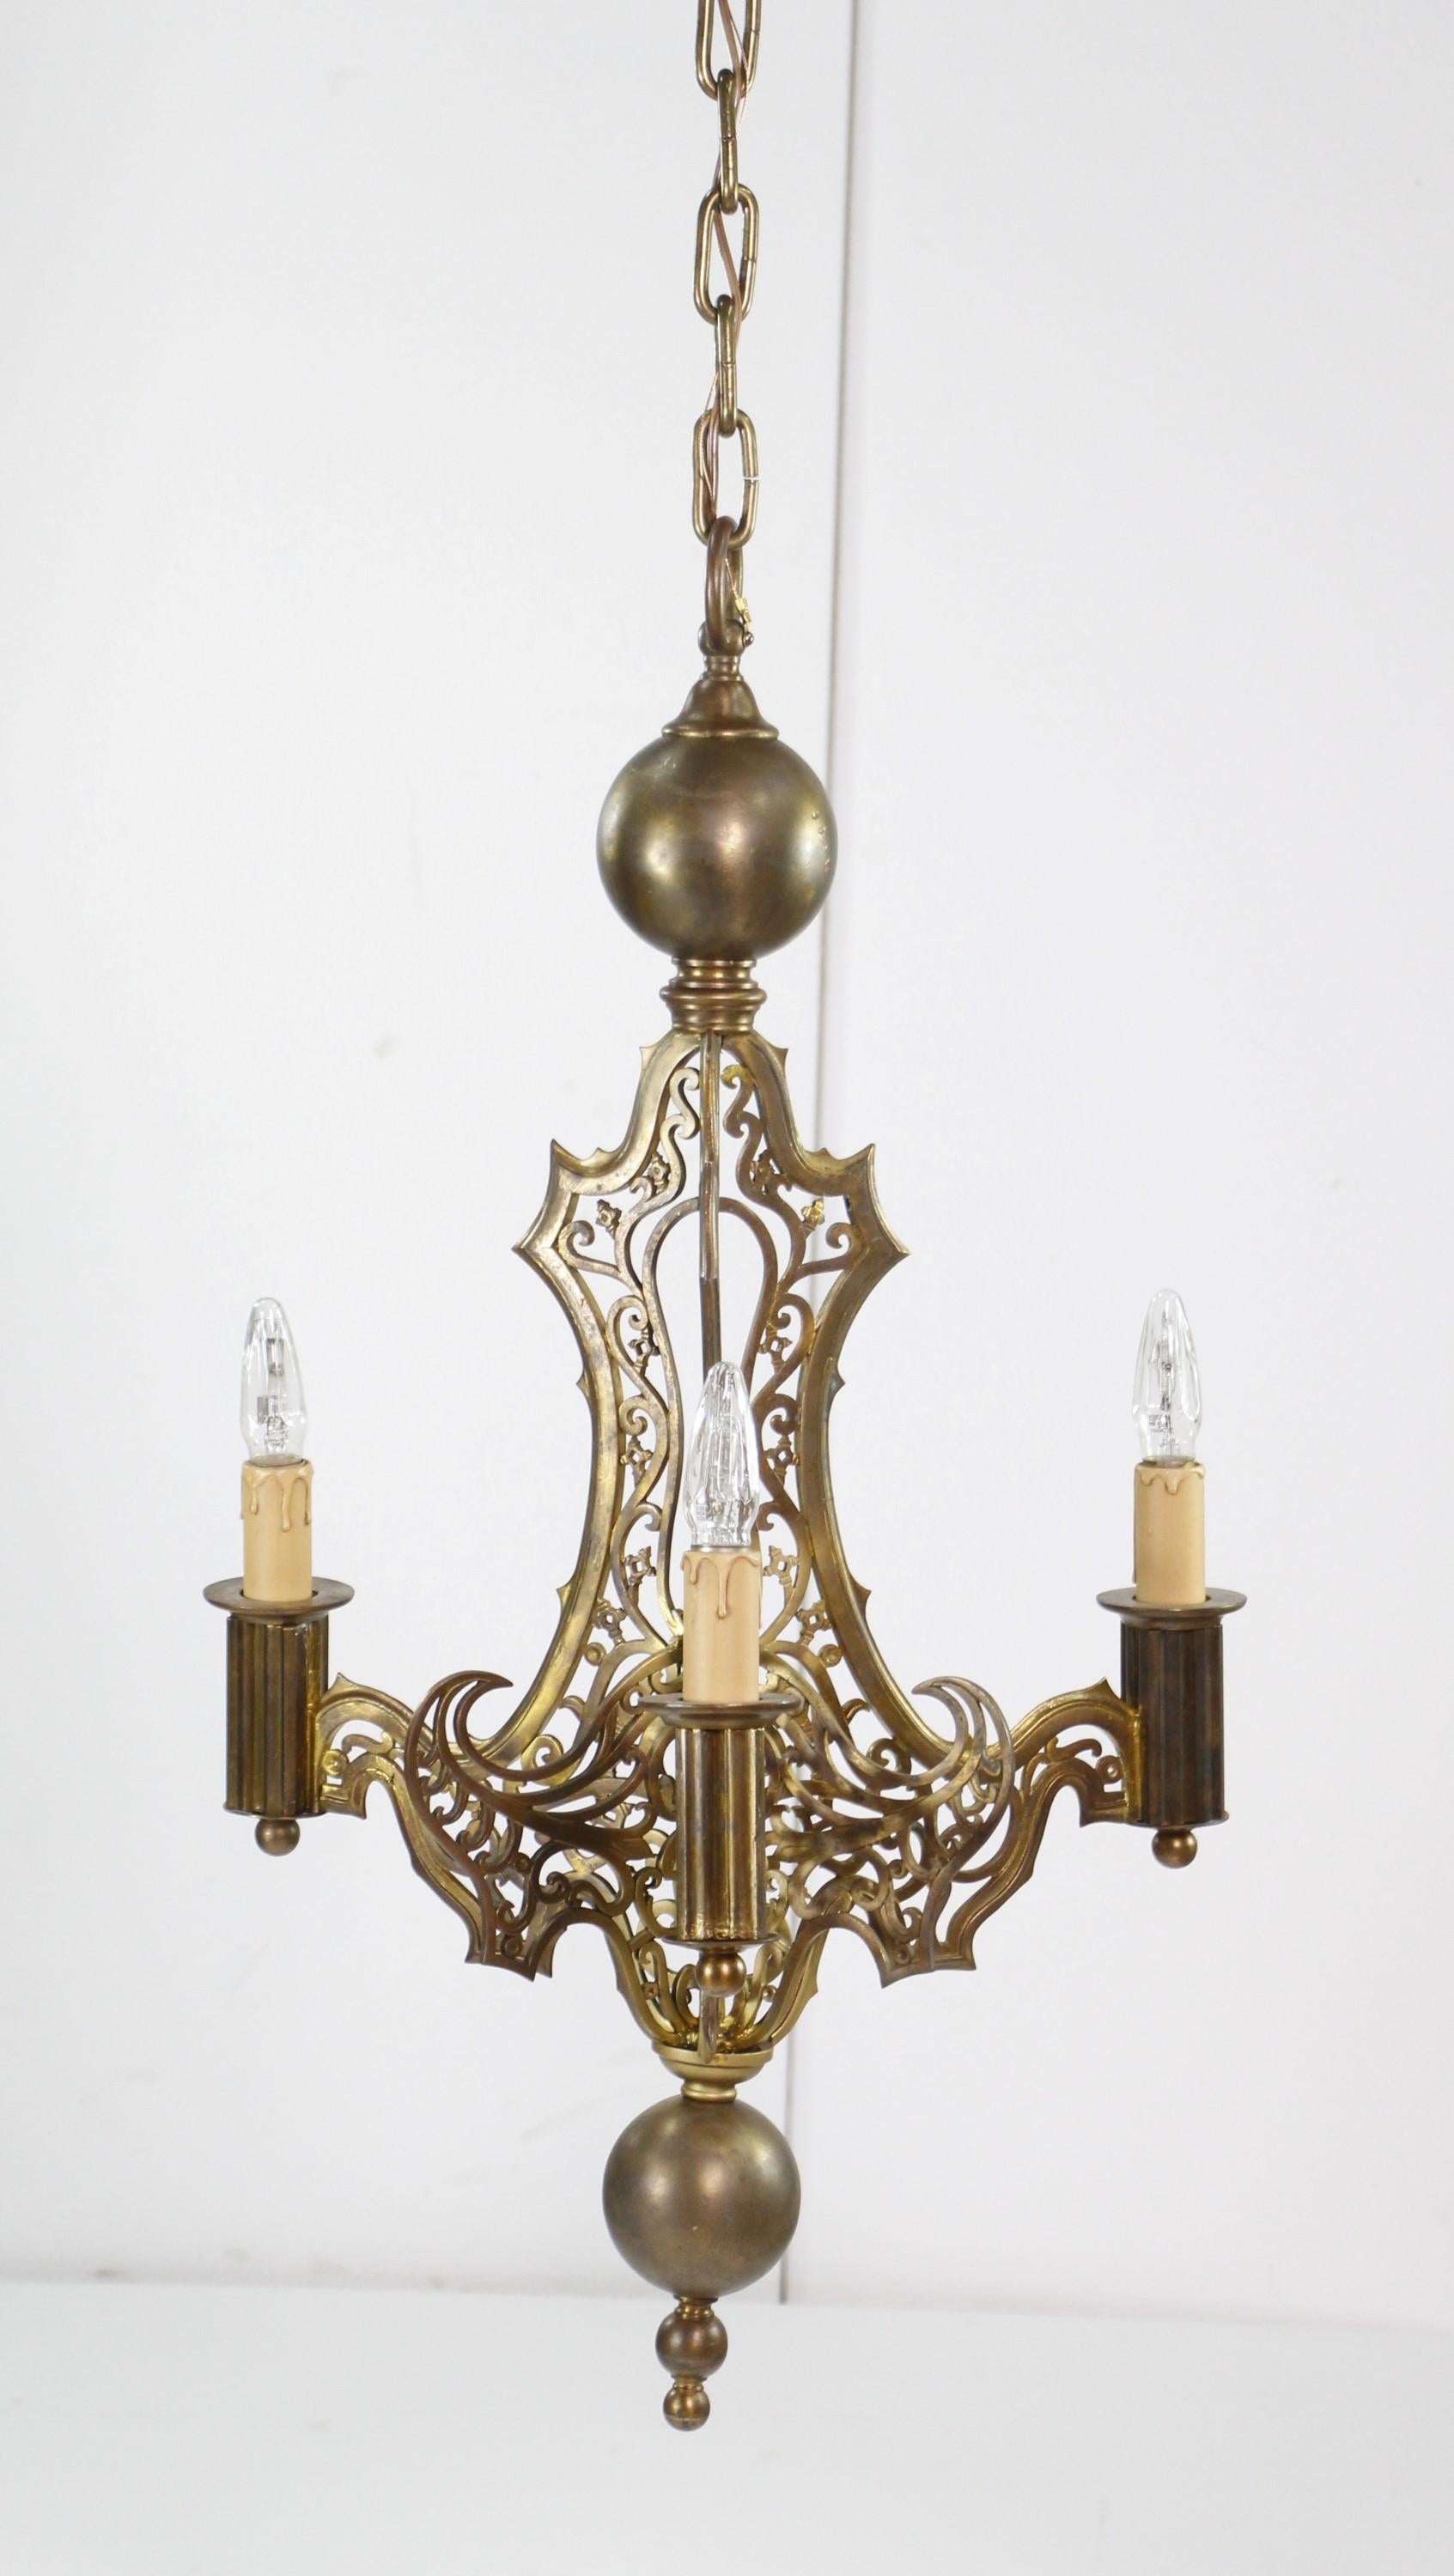 20th Century cleaned and restored three arm cast bronze chandelier. Done in a Gothic styling. Cleaned and restored. Brass finial details. Chain and canopy are brass also. Small quantity available at time of posting. Please inquire. Priced each.